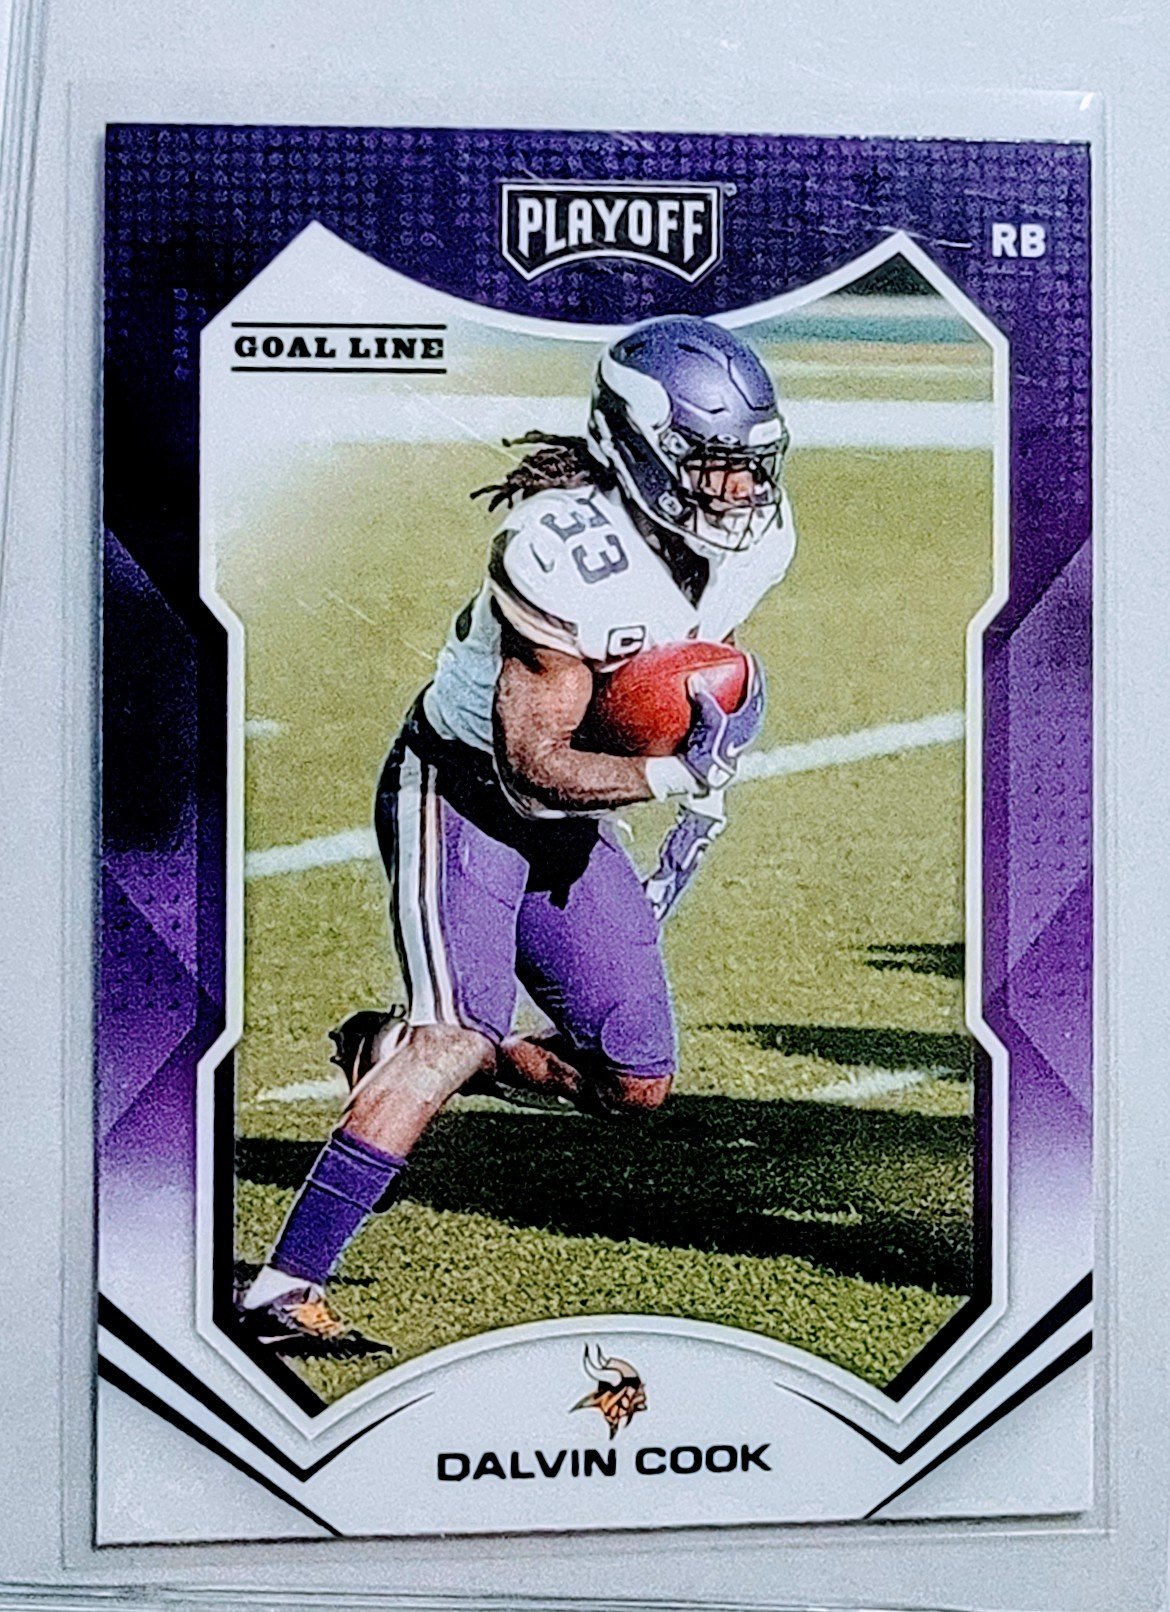 2021 Panini Rookies and Stars Dalvin Cook Goal Line Football Card AVM1 simple Xclusive Collectibles   